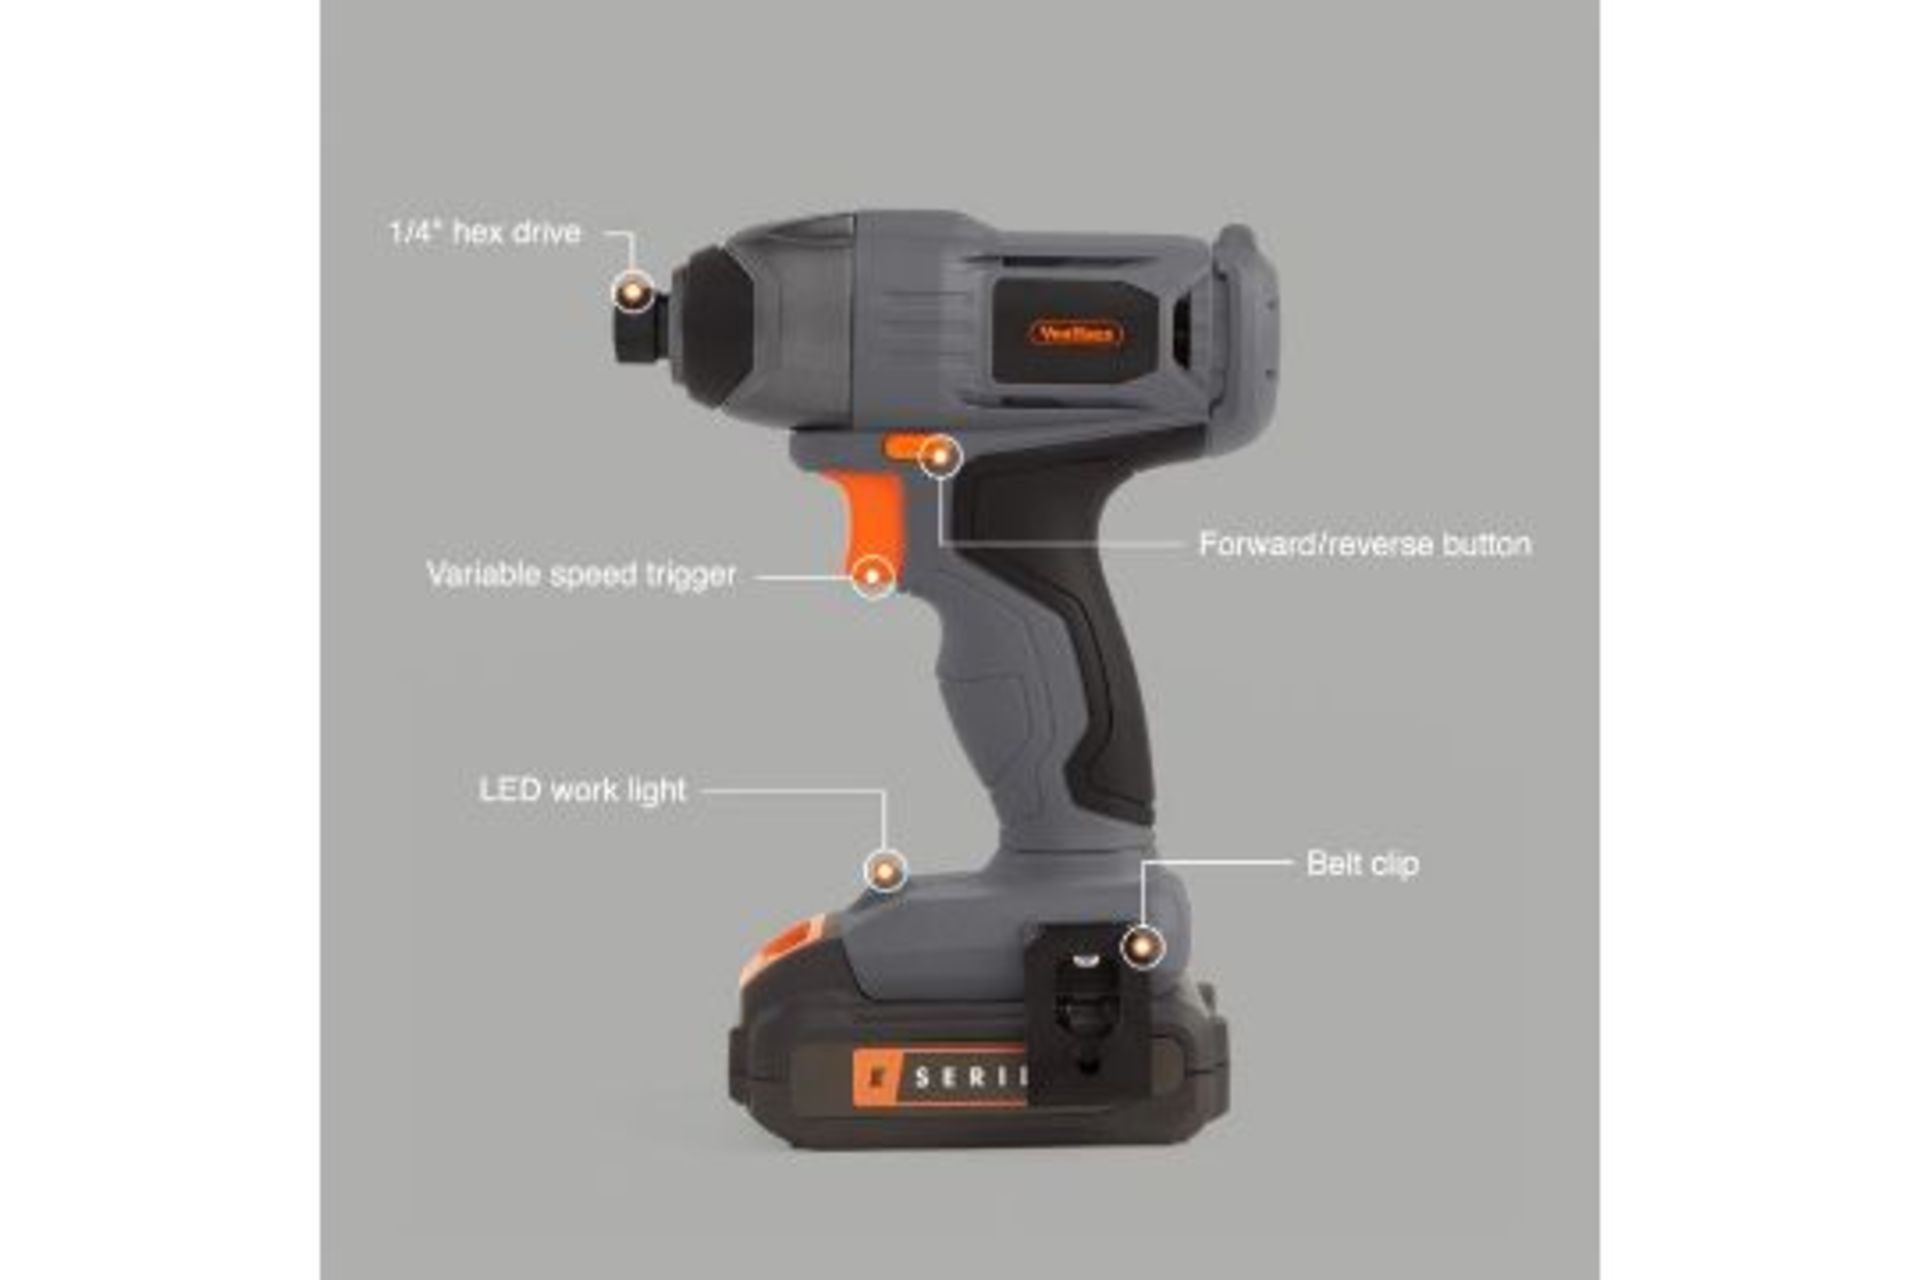 E Series Impact Driver. - PW. The impact mechanism provides a strong rotational force of 100NM of